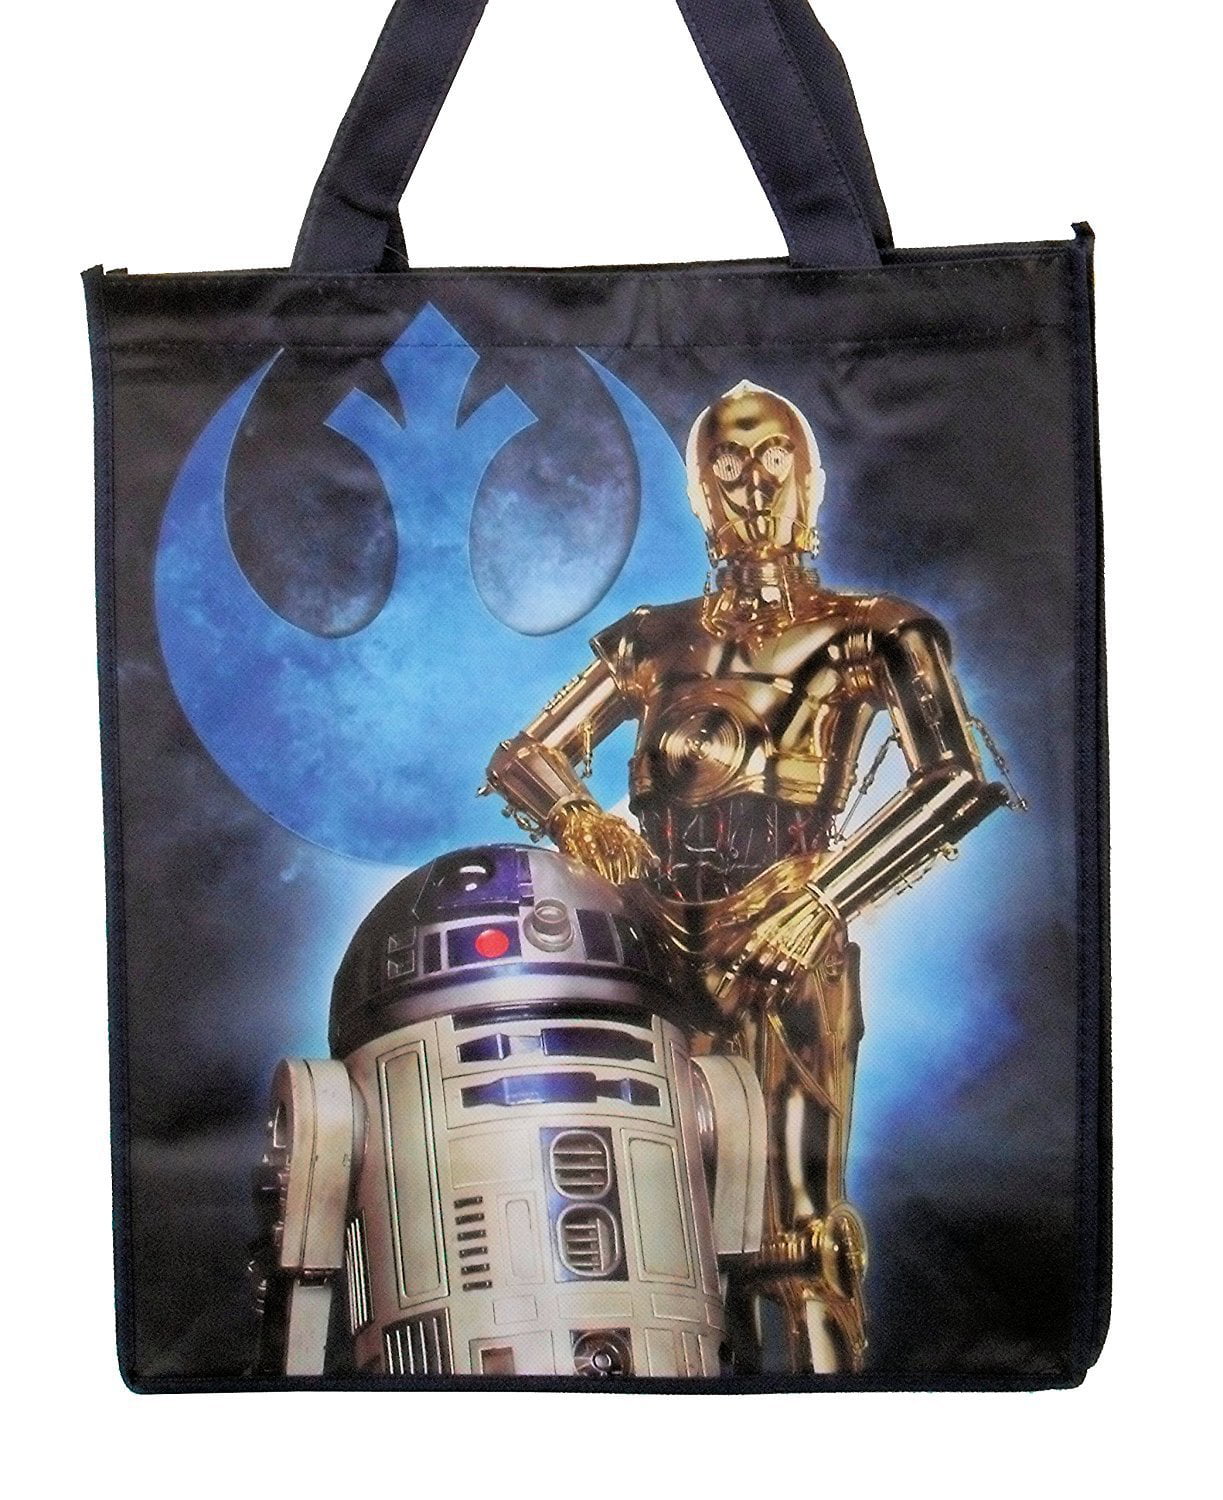 Star Wars Shopping Tote Bags Set of 6 Large for sale online 